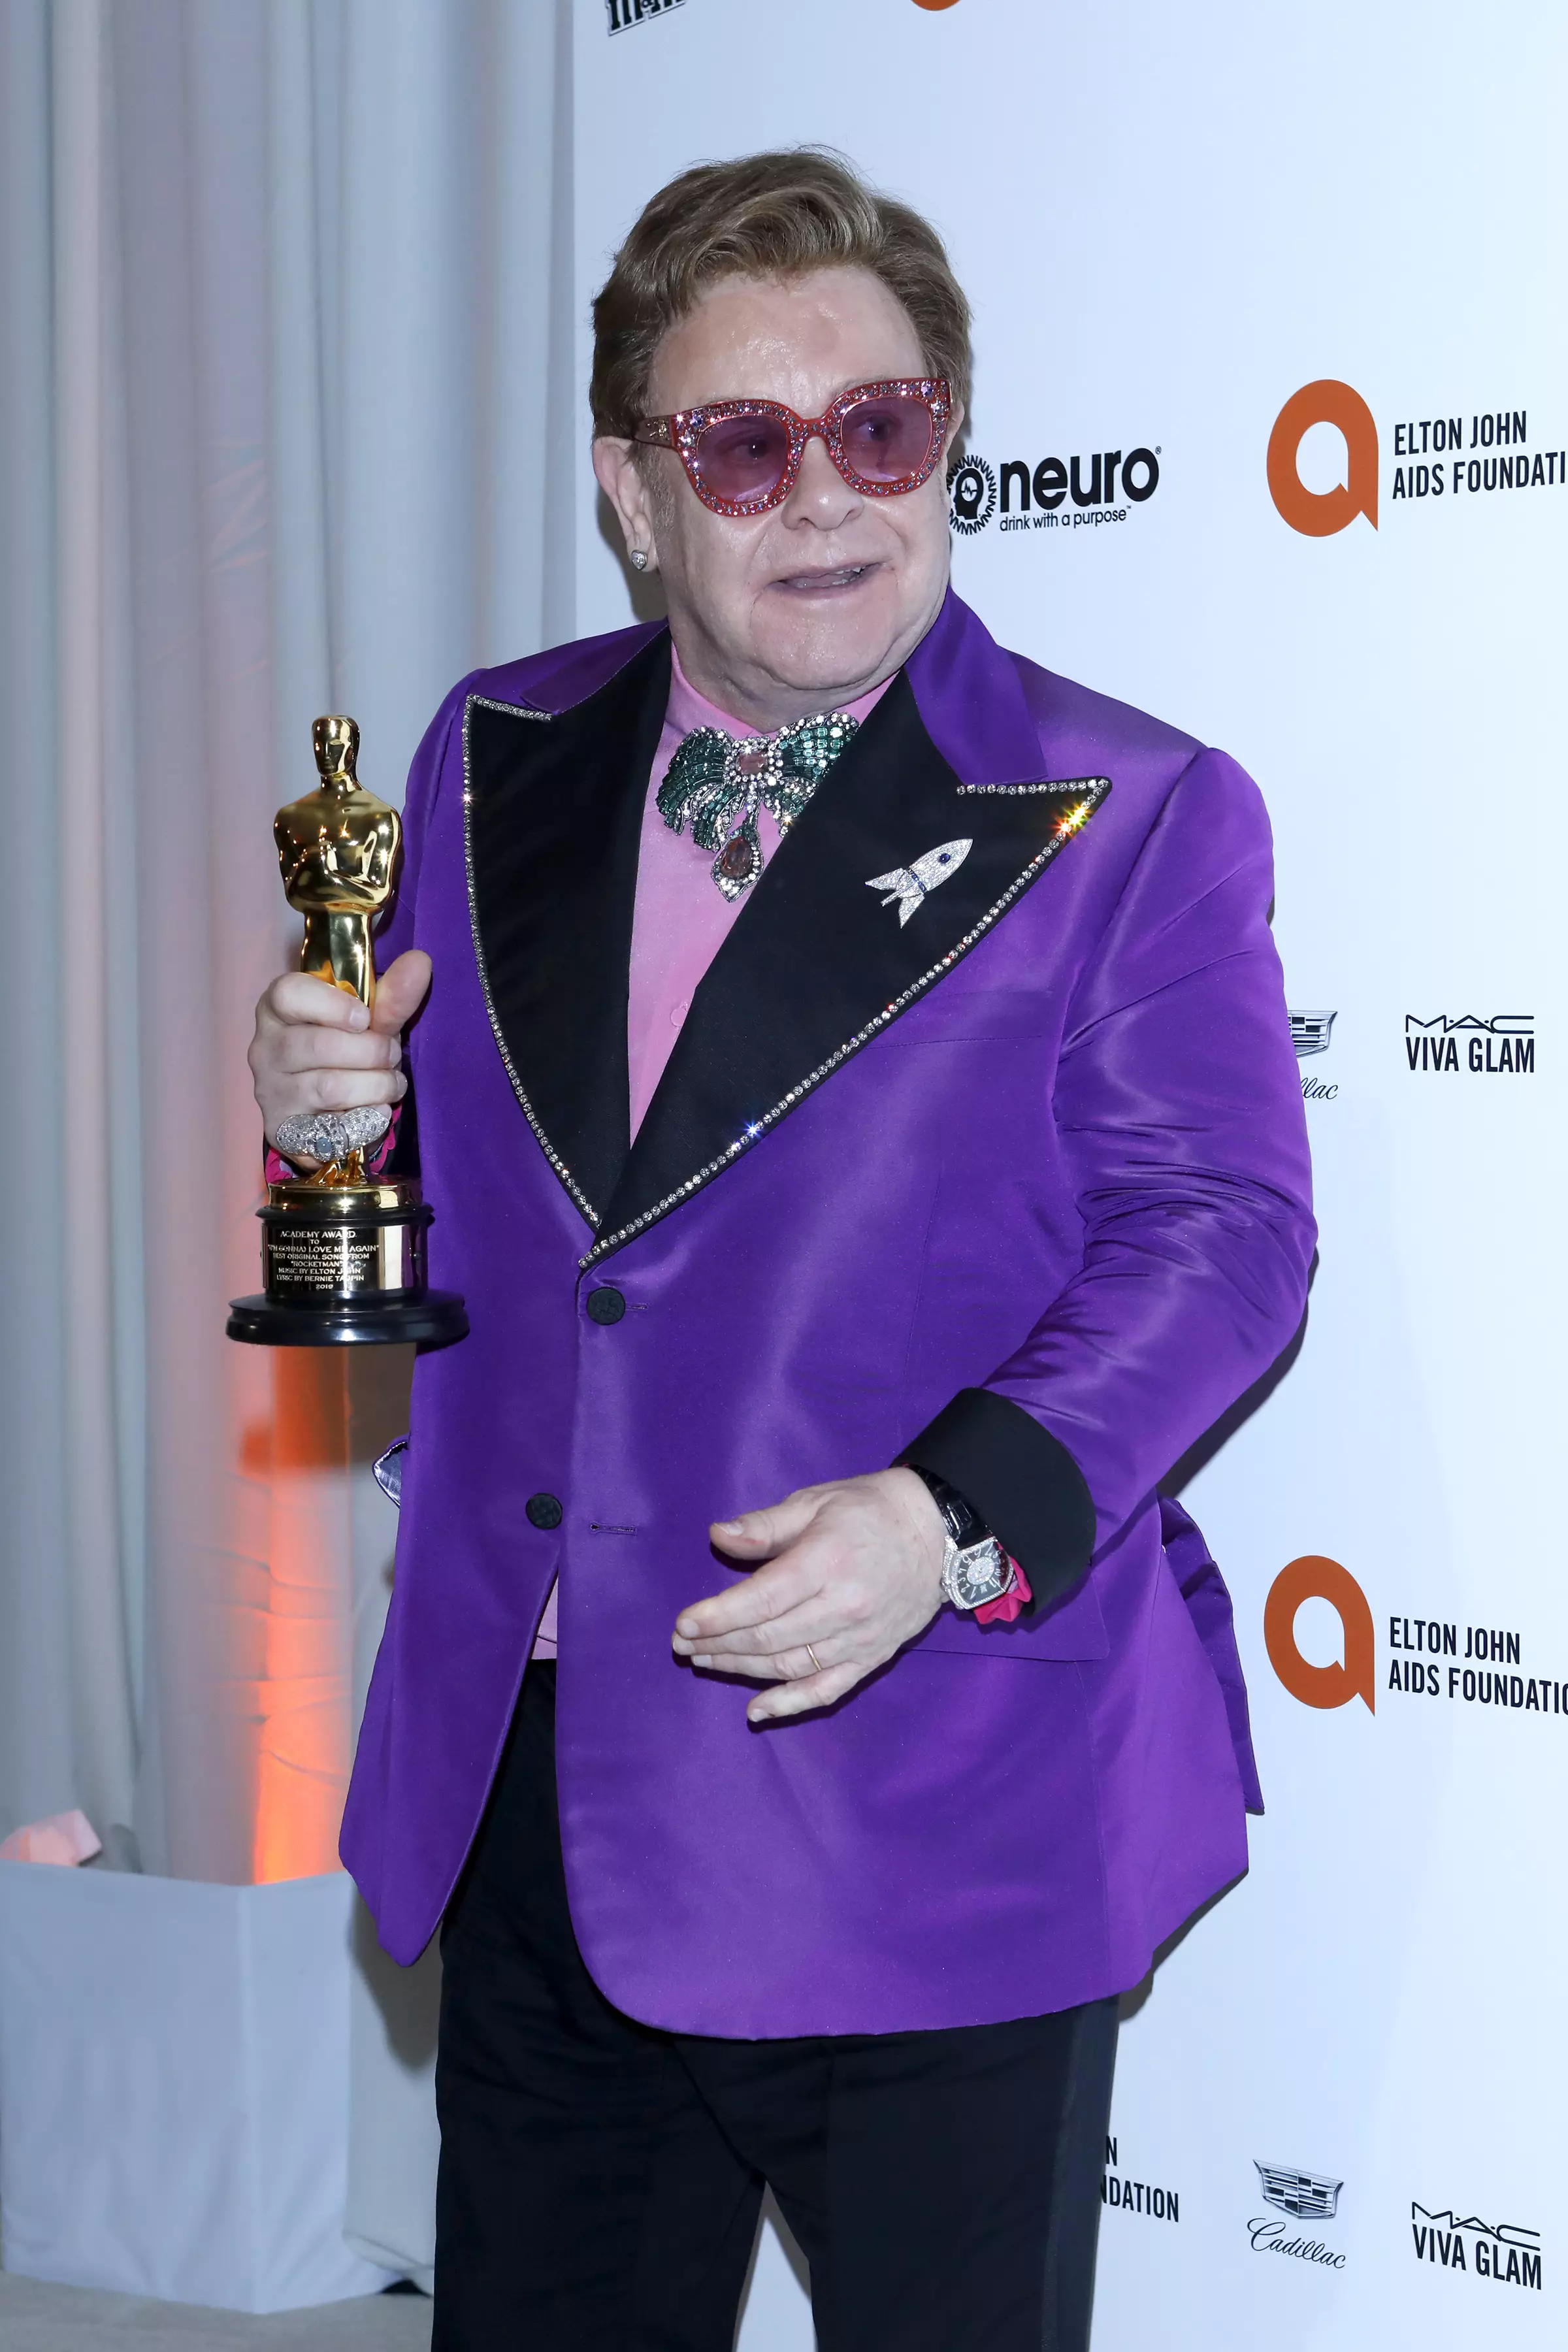 Sir Elton will be performing at the One World gig.